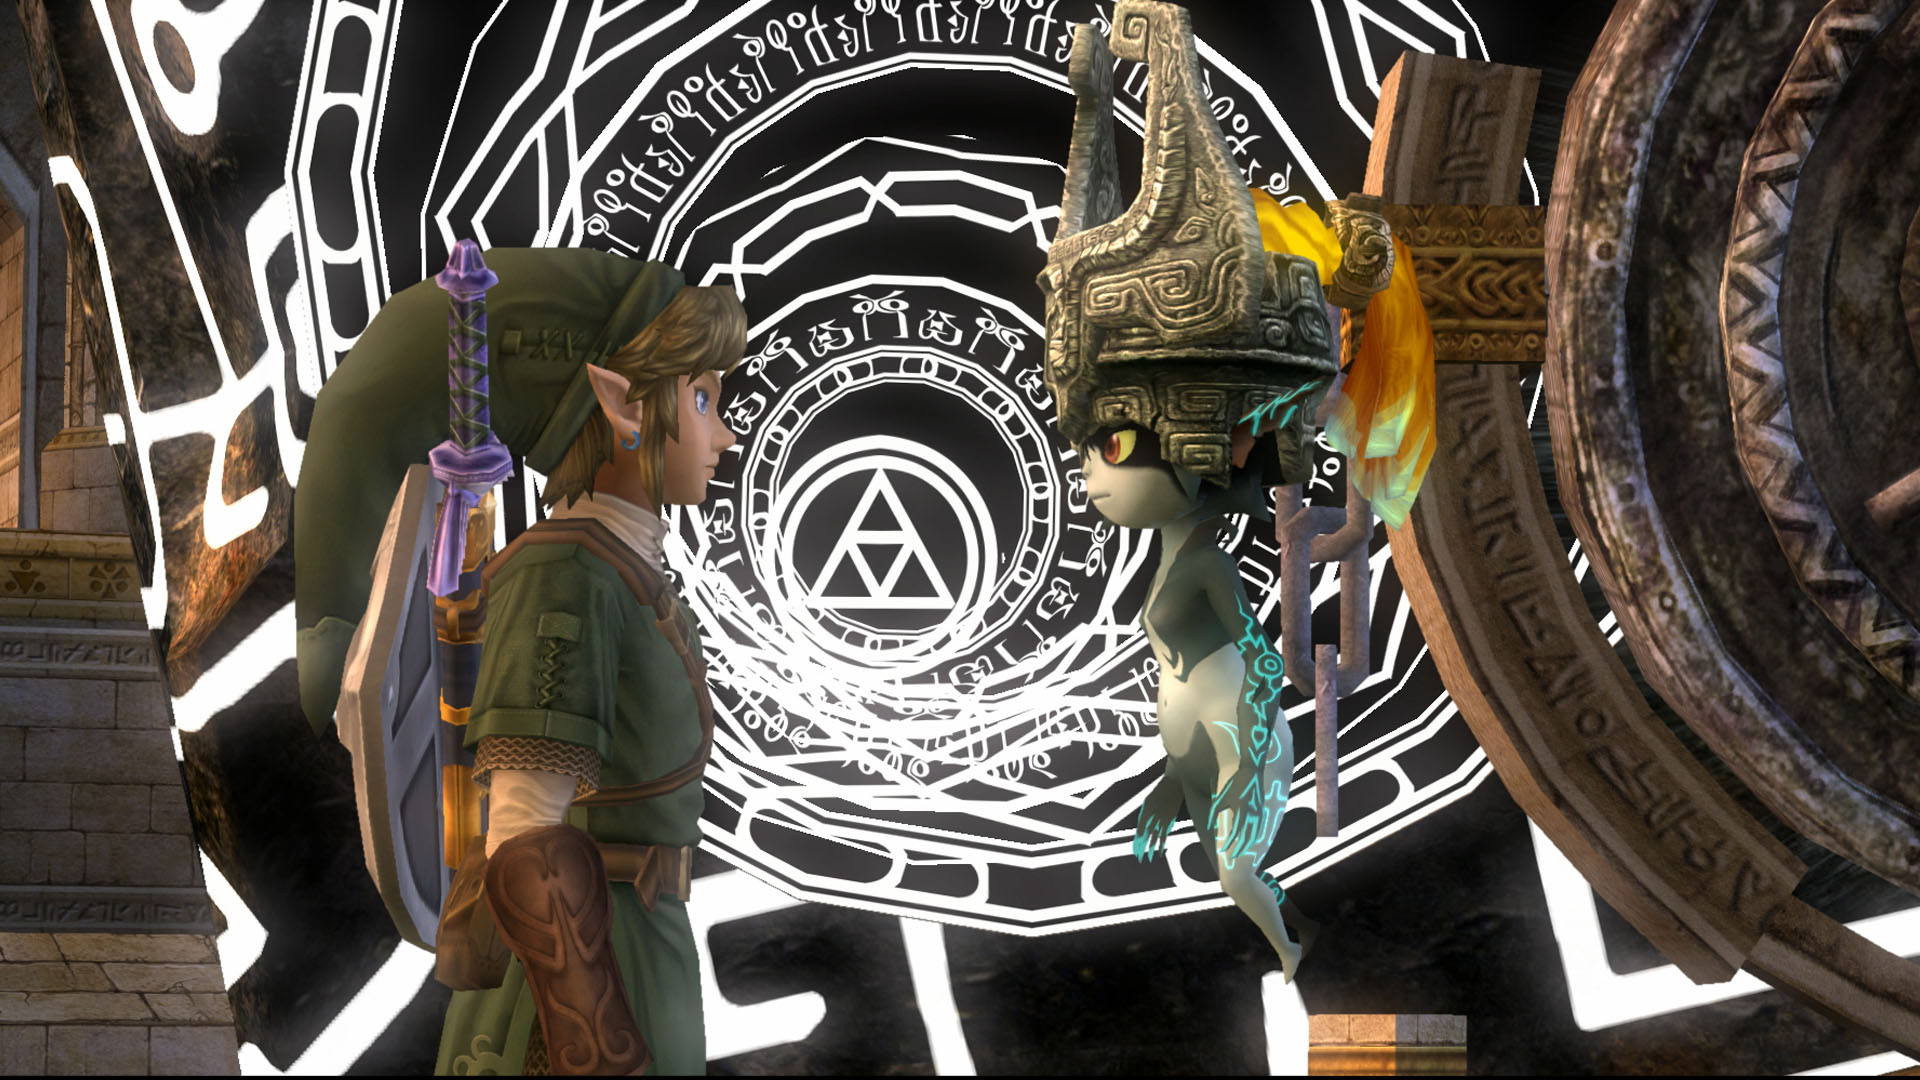 Zelda: Twilight Princess and Wind Waker Switch Ports to Release This Year  Alongside Metroid Prime Remastered, Grubb Believes